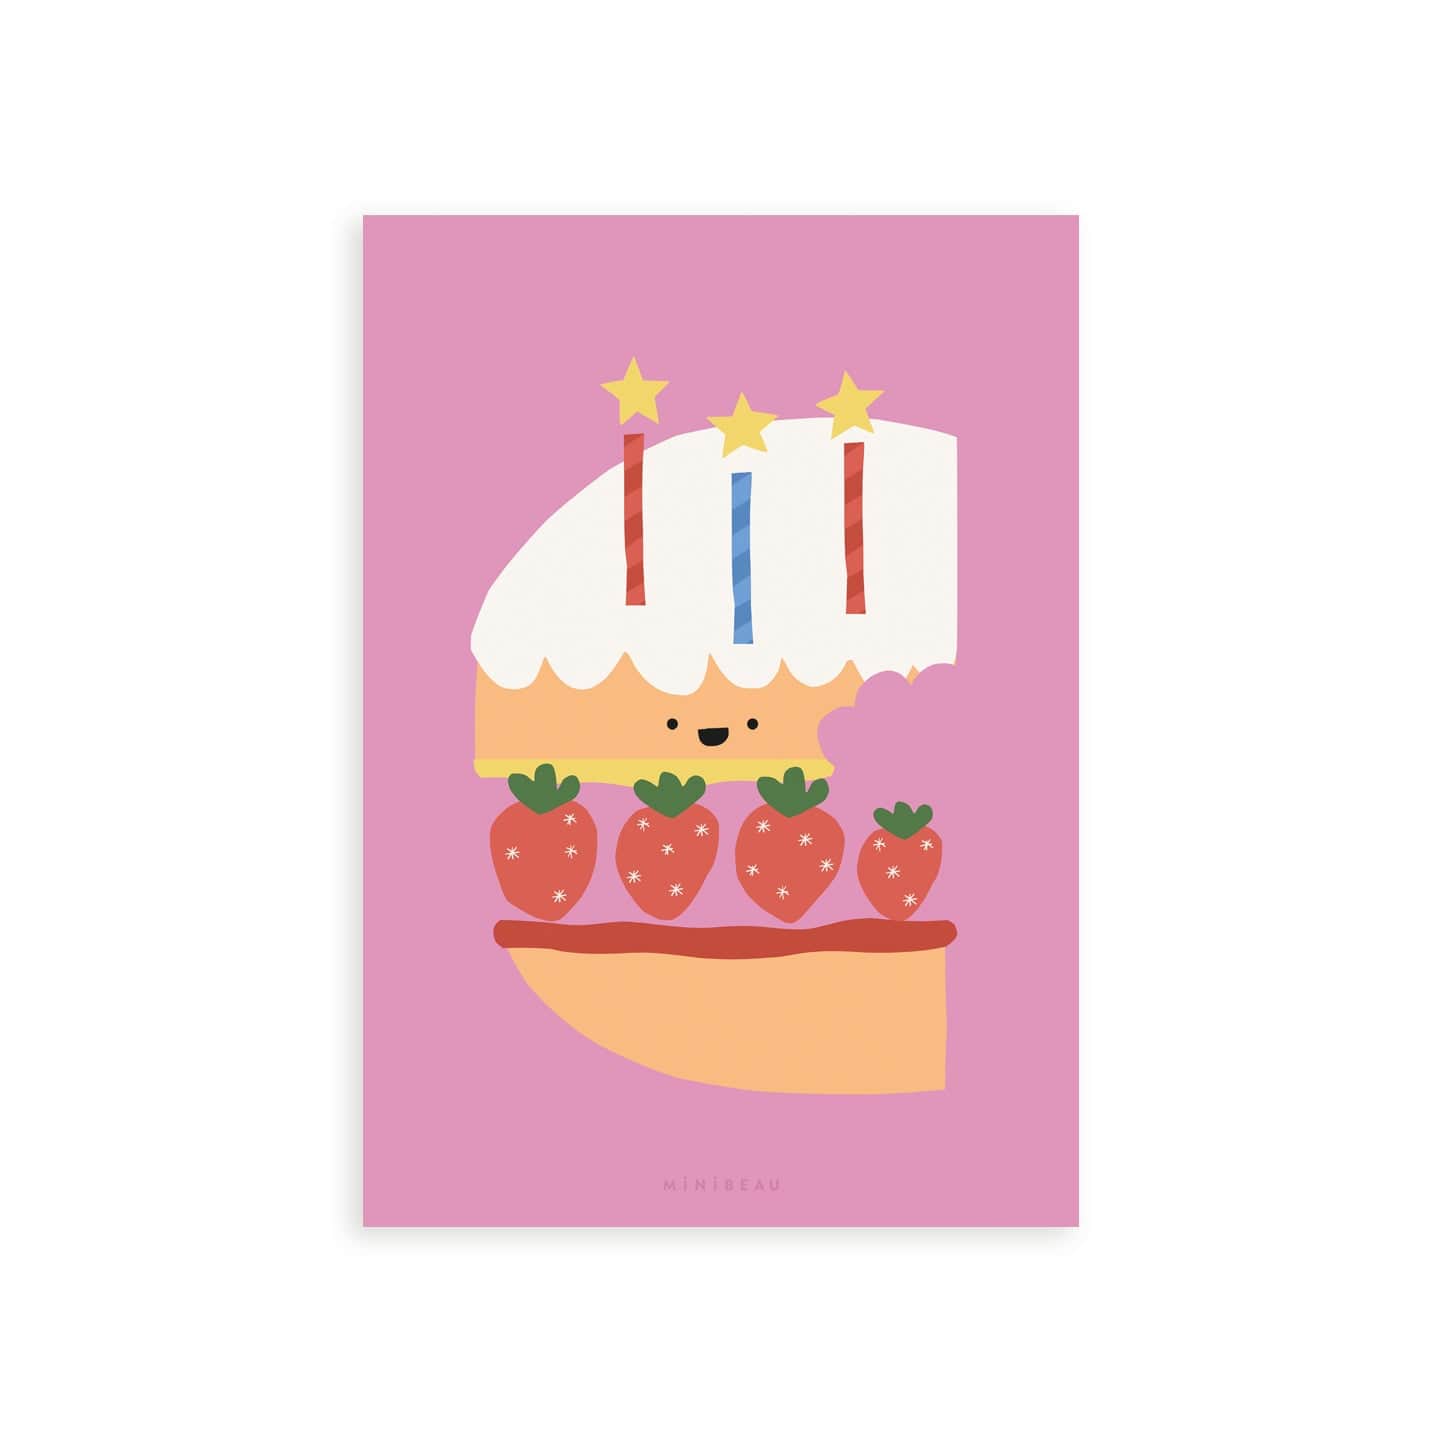 Our Happy Alphabet 'C' Art Print shows a layered cake in the shape of a C, with a layer of cake, then jam, then strawberries, then cream, then cake then white icing, with 3 candles, 2 red, 2 blue, with stars for flames, on a pink background.